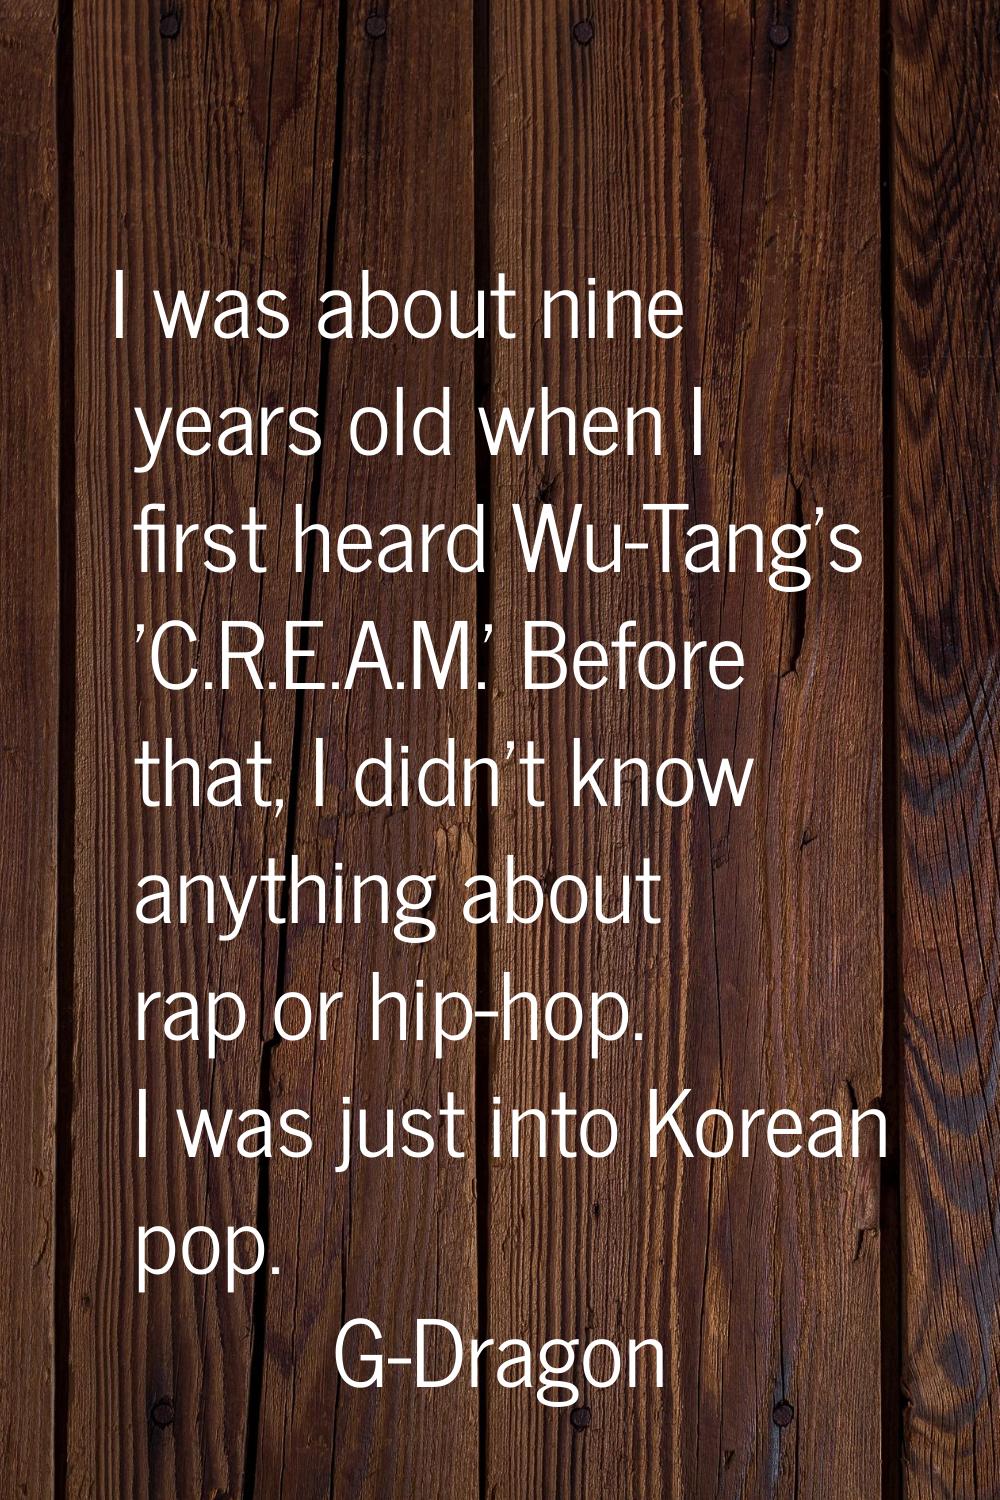 I was about nine years old when I first heard Wu-Tang's 'C.R.E.A.M.' Before that, I didn't know any